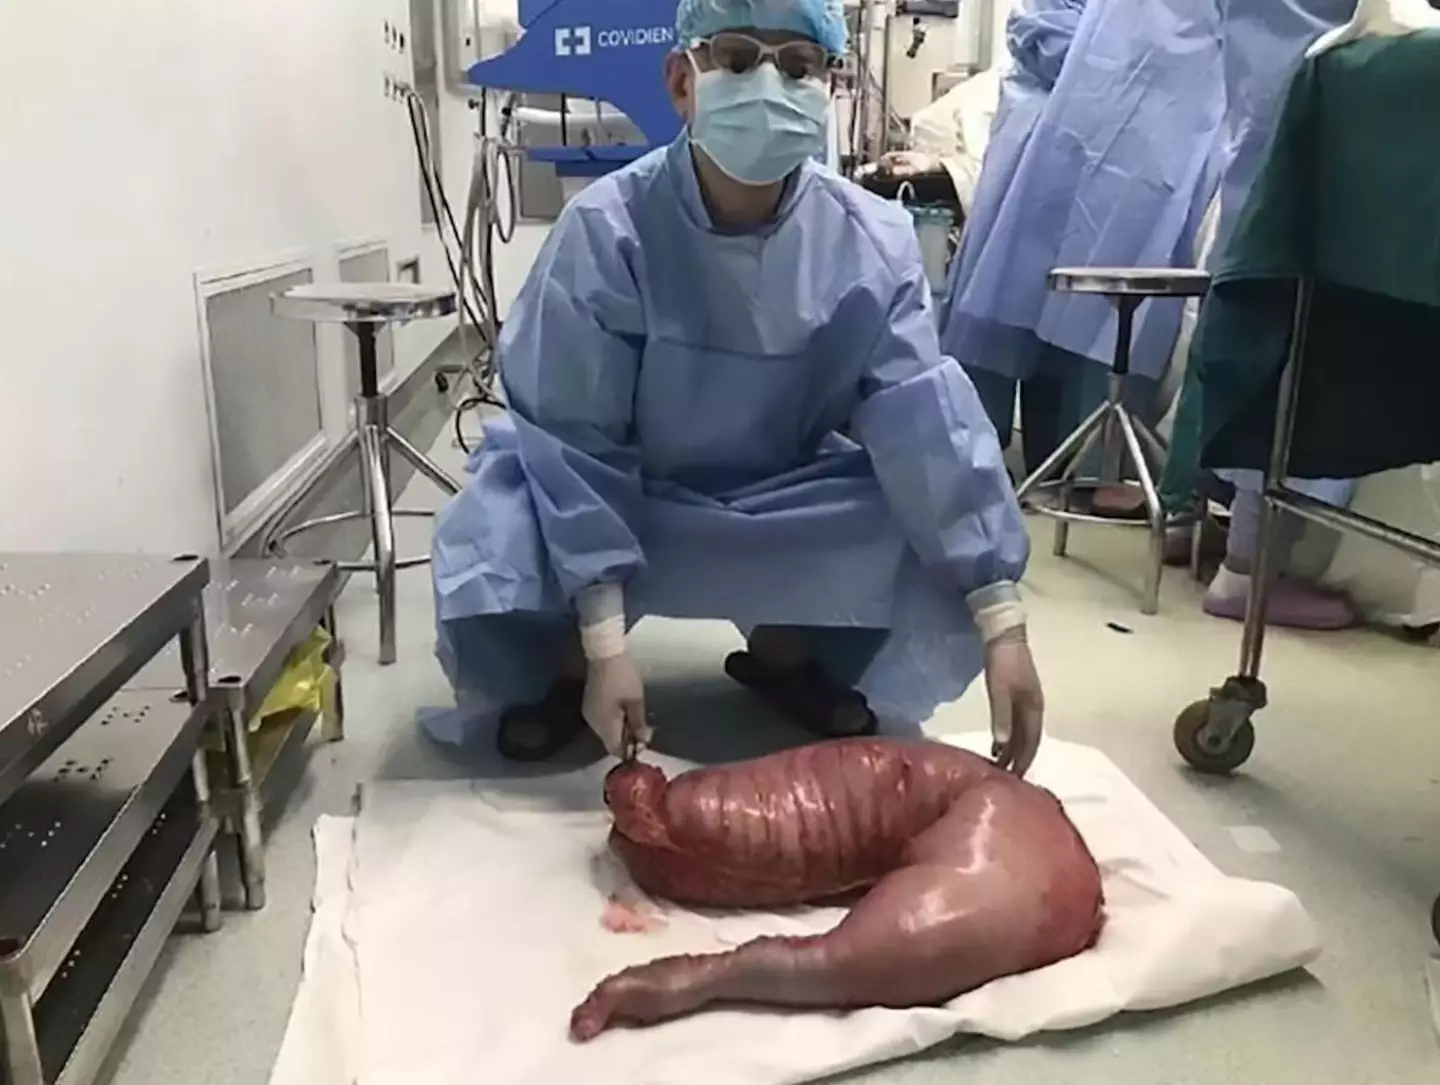 Surgeons removed 30 inches of the man's colon.